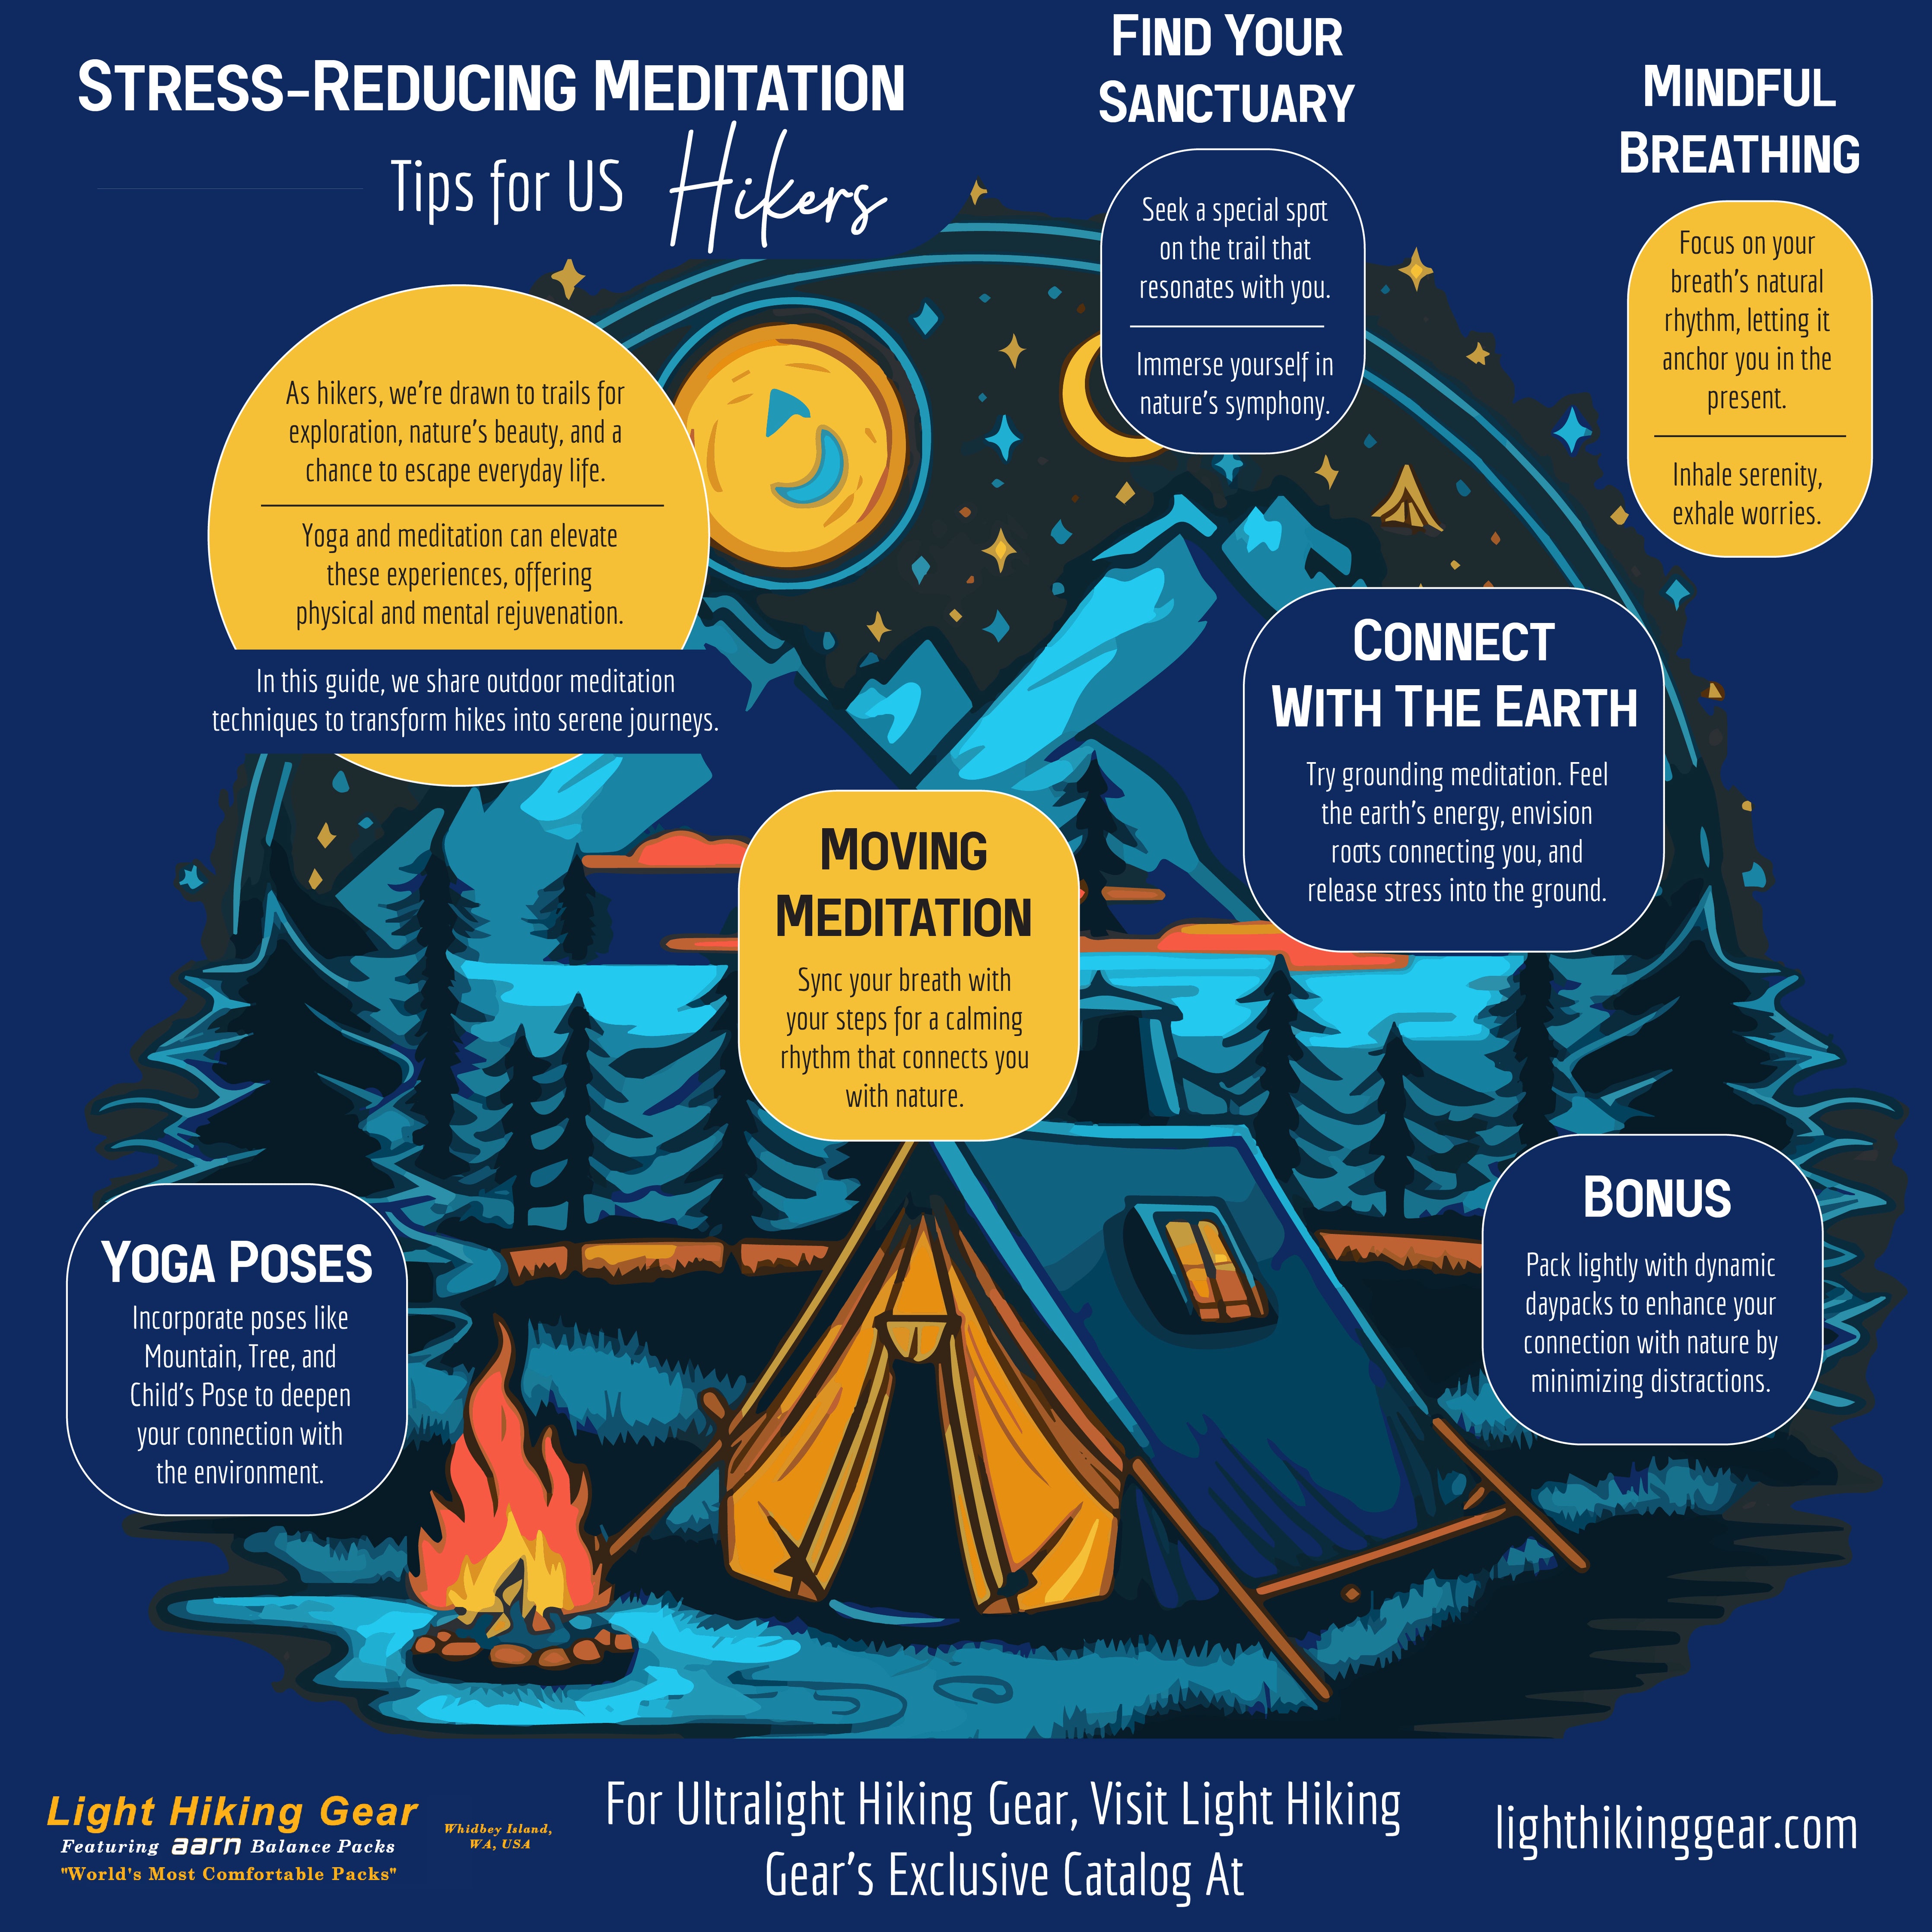 Stress Reducing Meditation Tips For U.S. Hikers